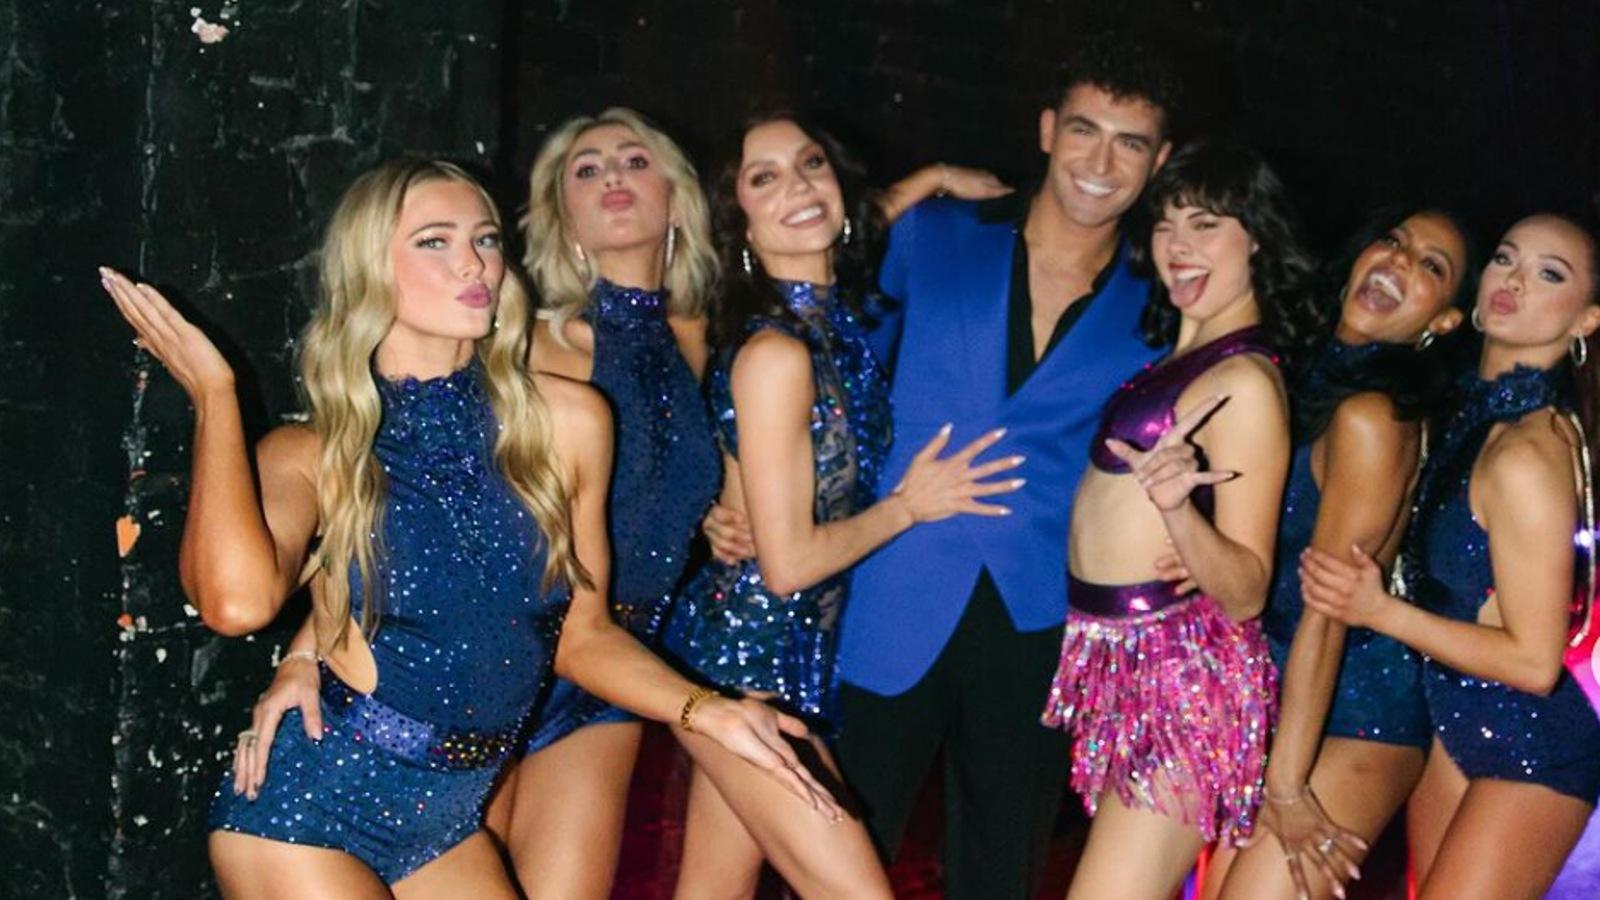 Dancing with the stars tour cast